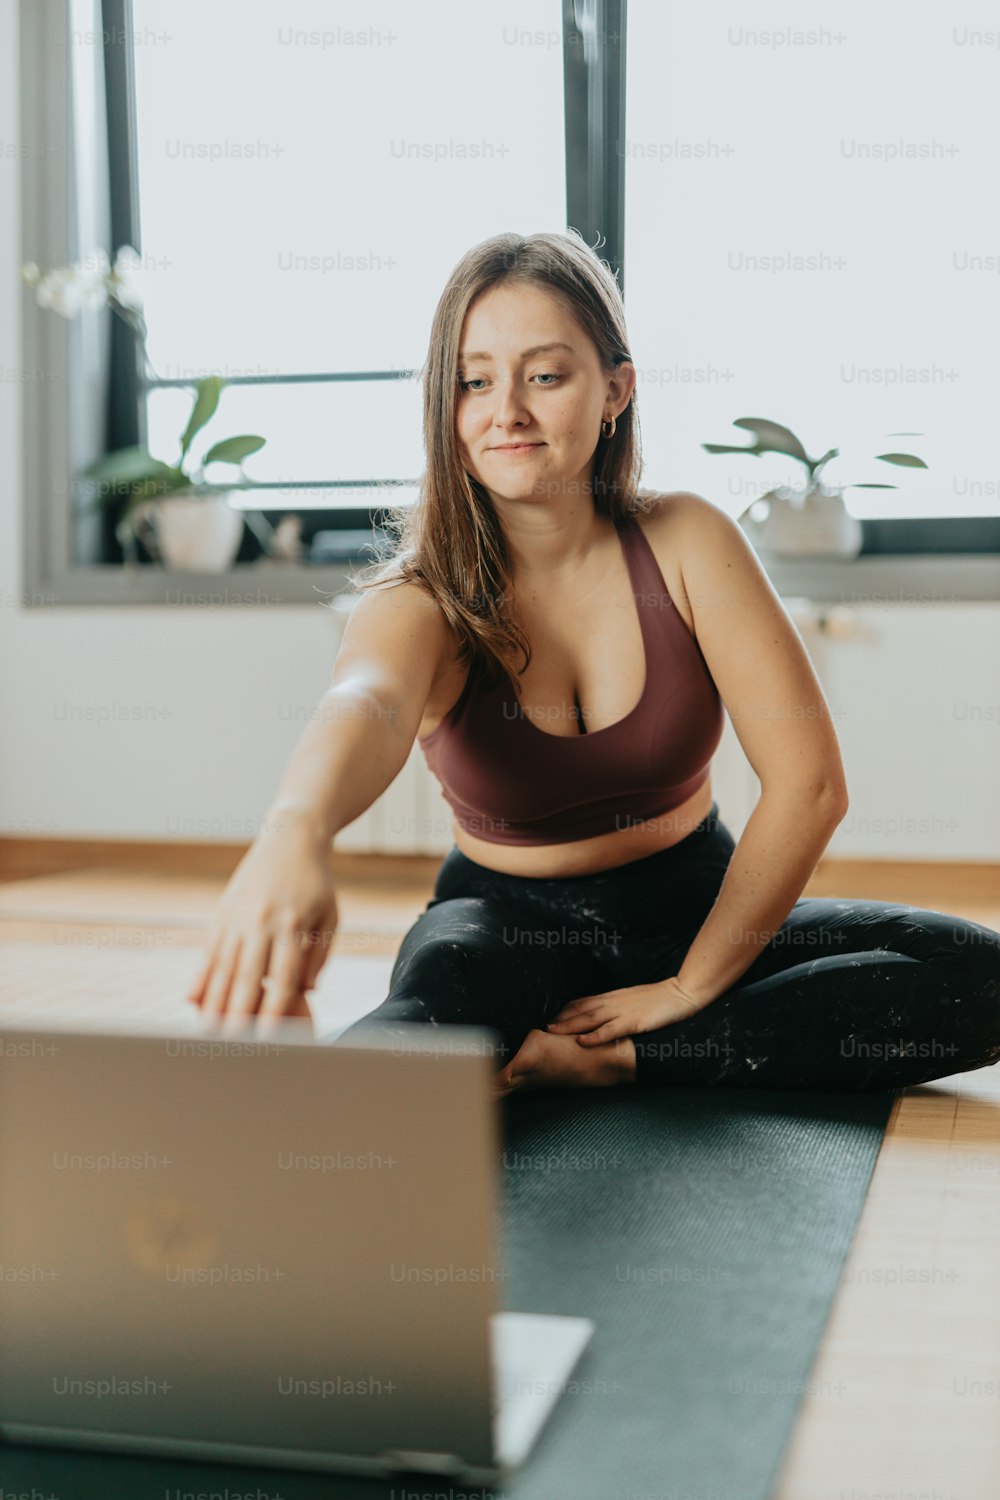 a woman sitting on a yoga mat in front of a laptop